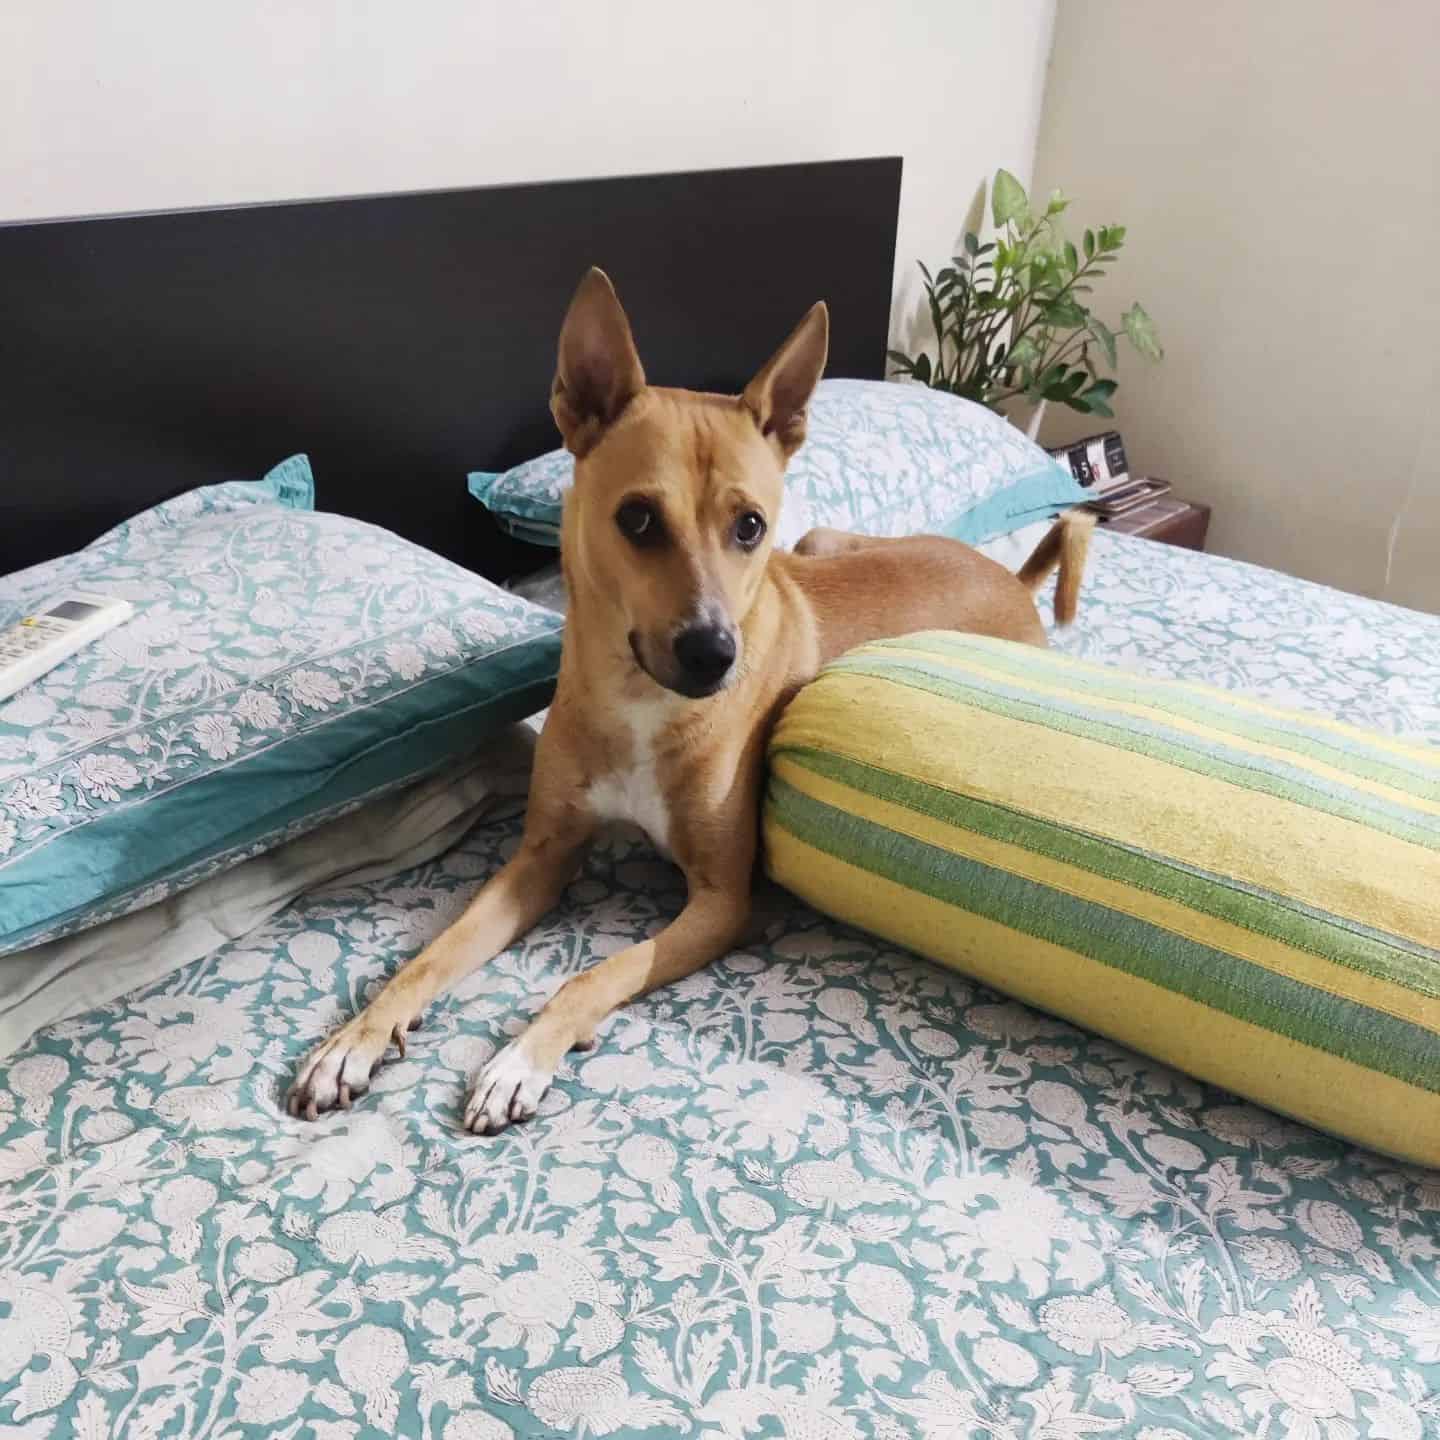 Indian Pariah Dog on the bed